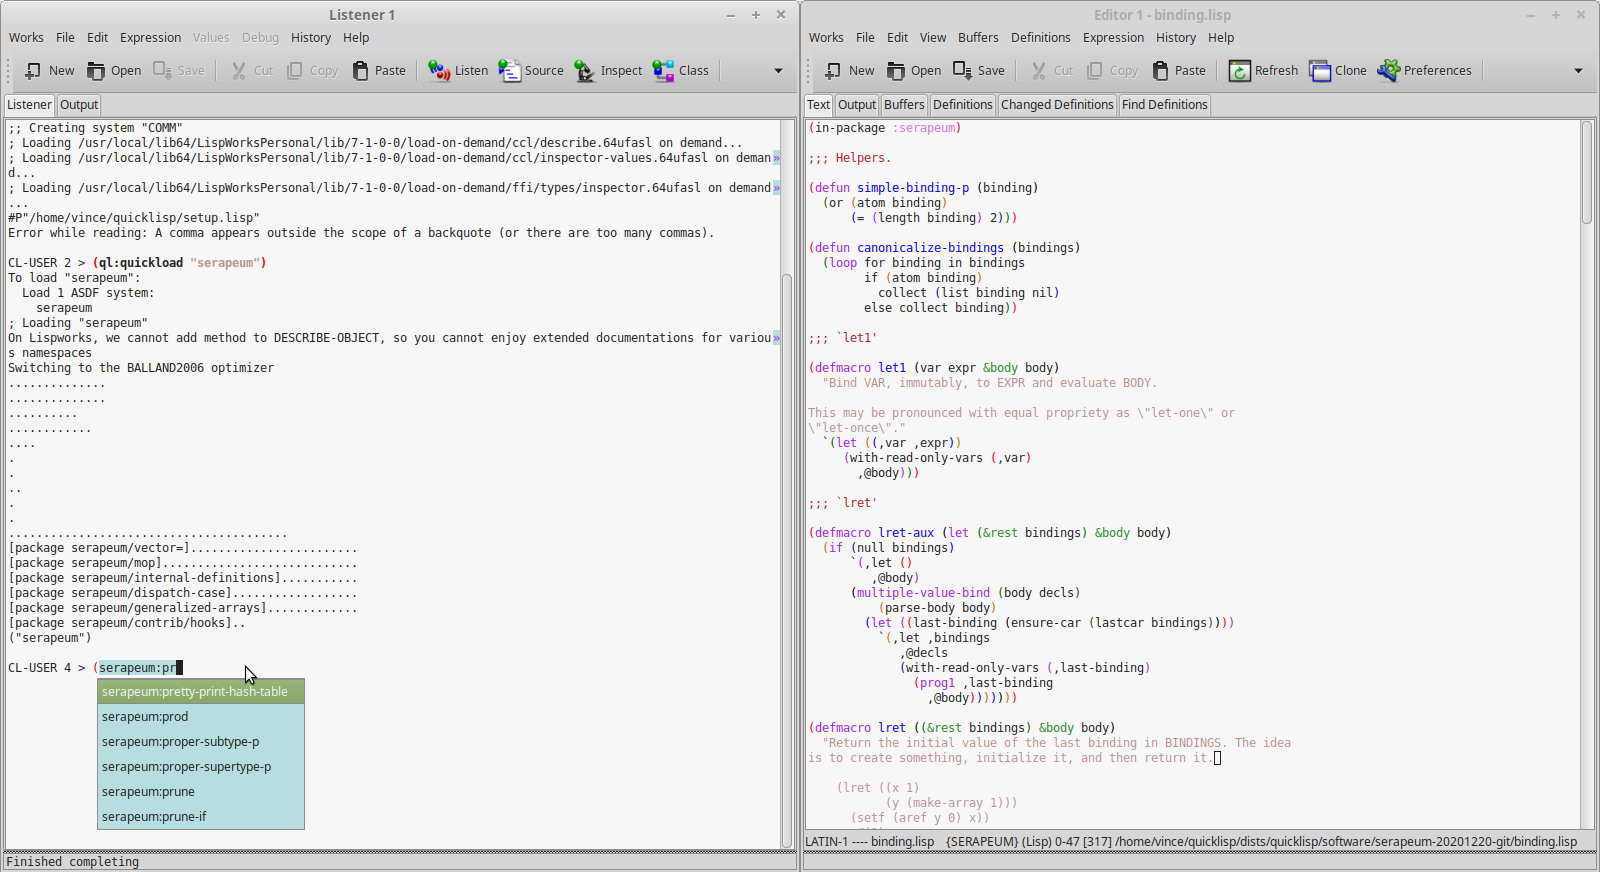 The LispWorks listener and the editor in the Mate desktop environment